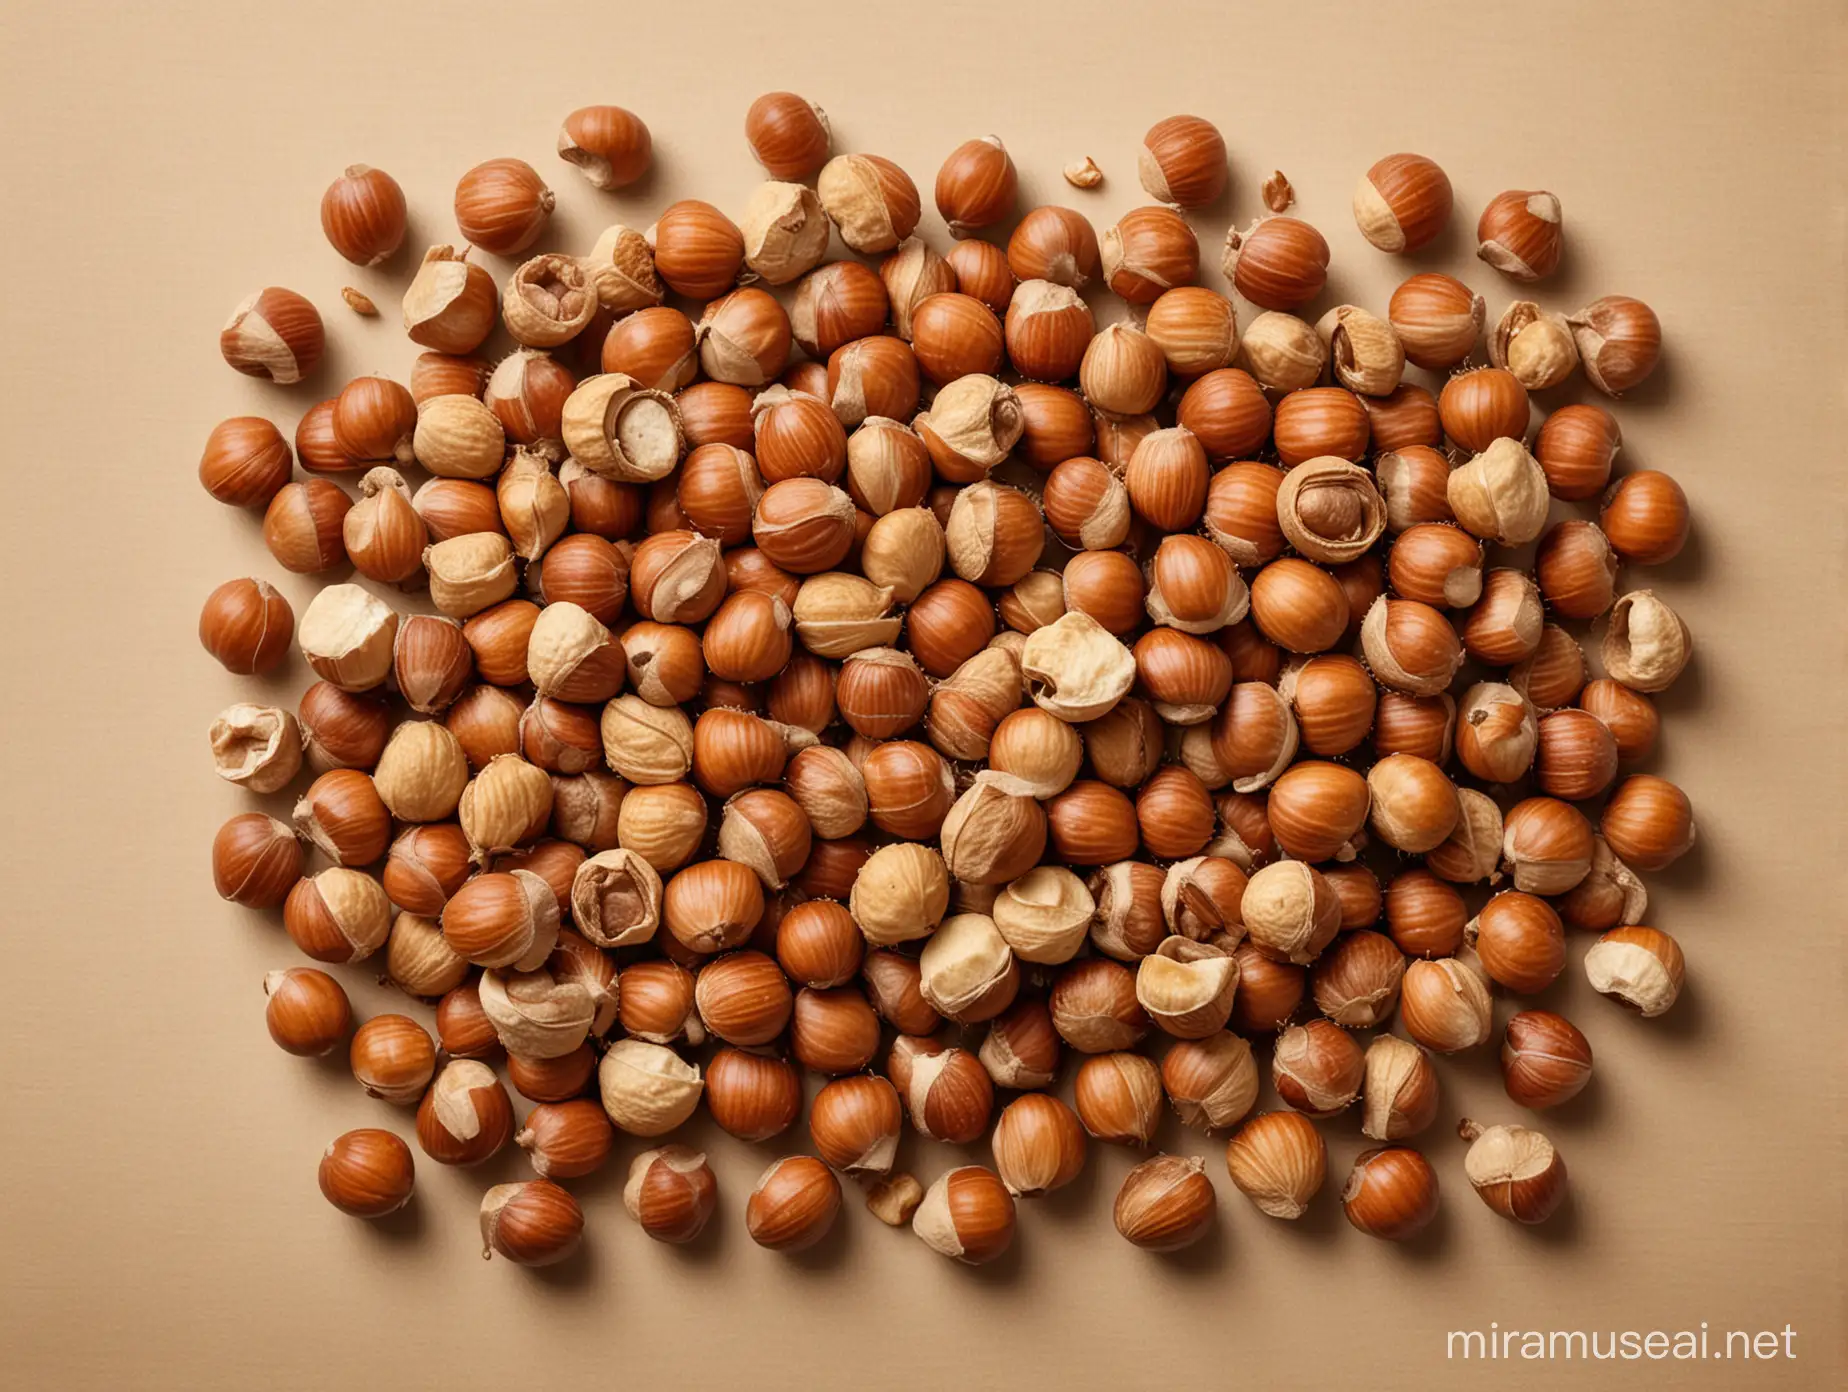 Studio photography with a single color background of hazelnuts